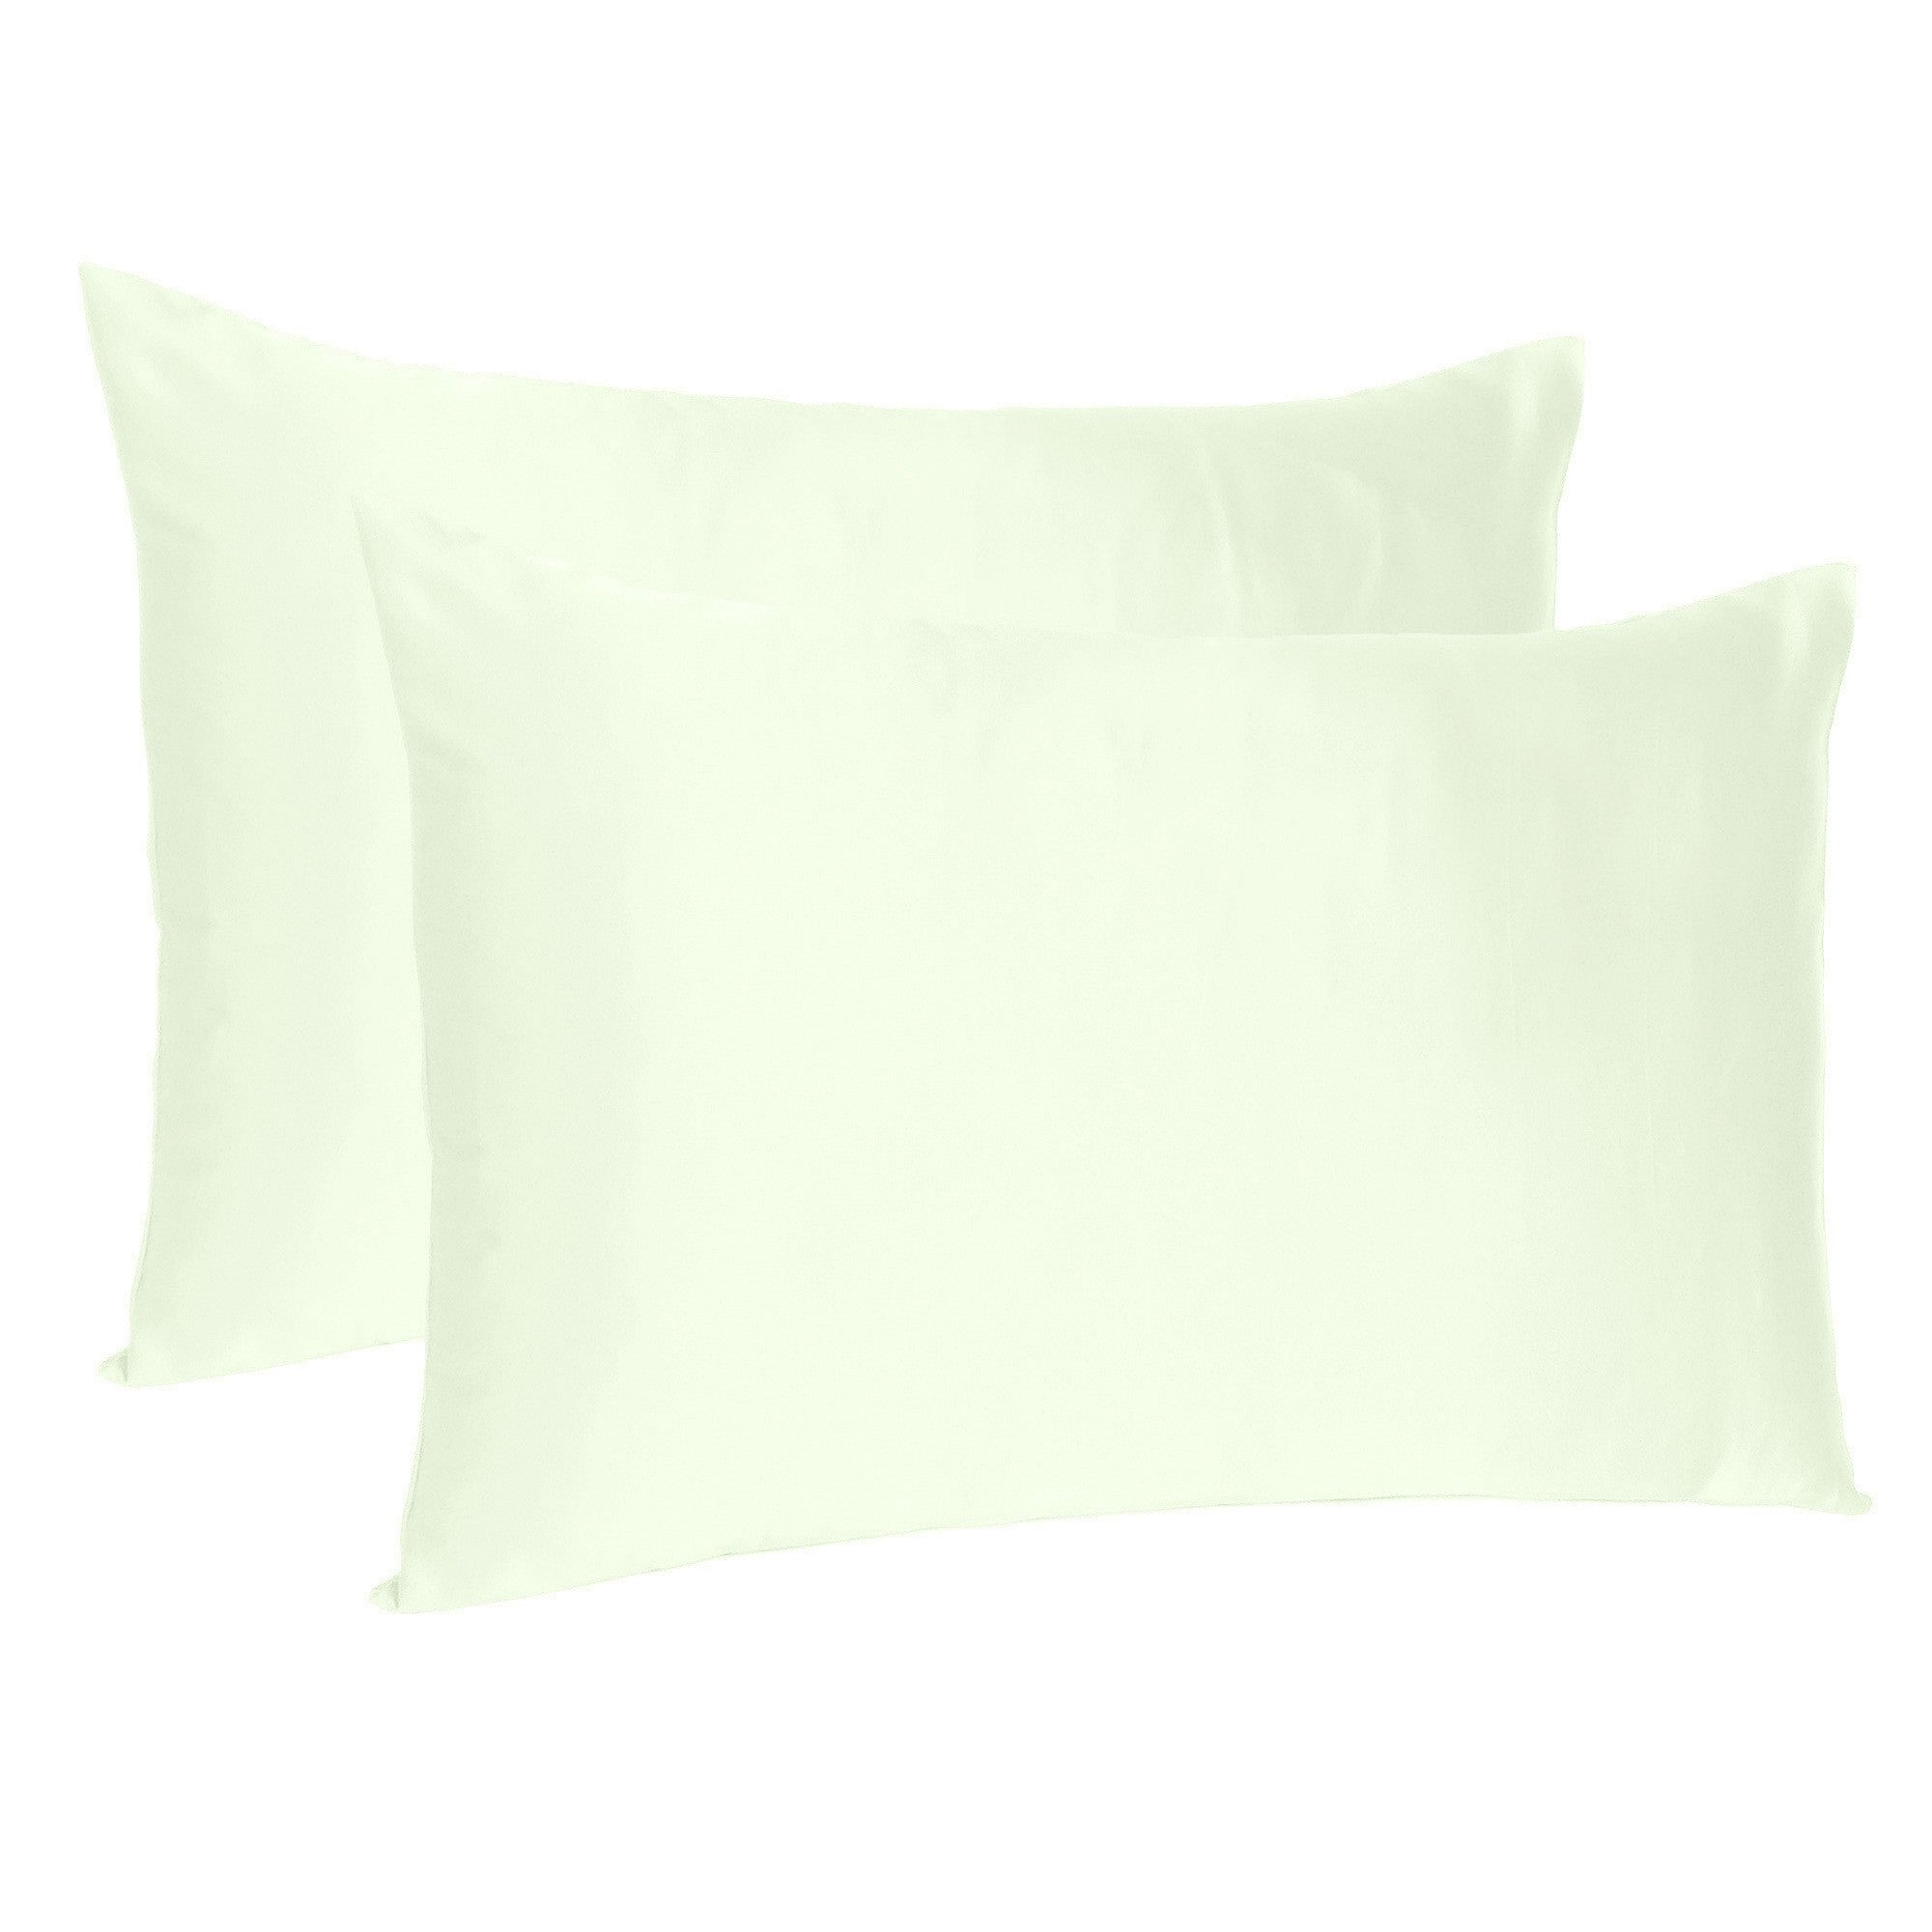 Ivory-Dreamy-Set-Of-2-Silky-Satin-Queen-Pillowcases-Pillowcases